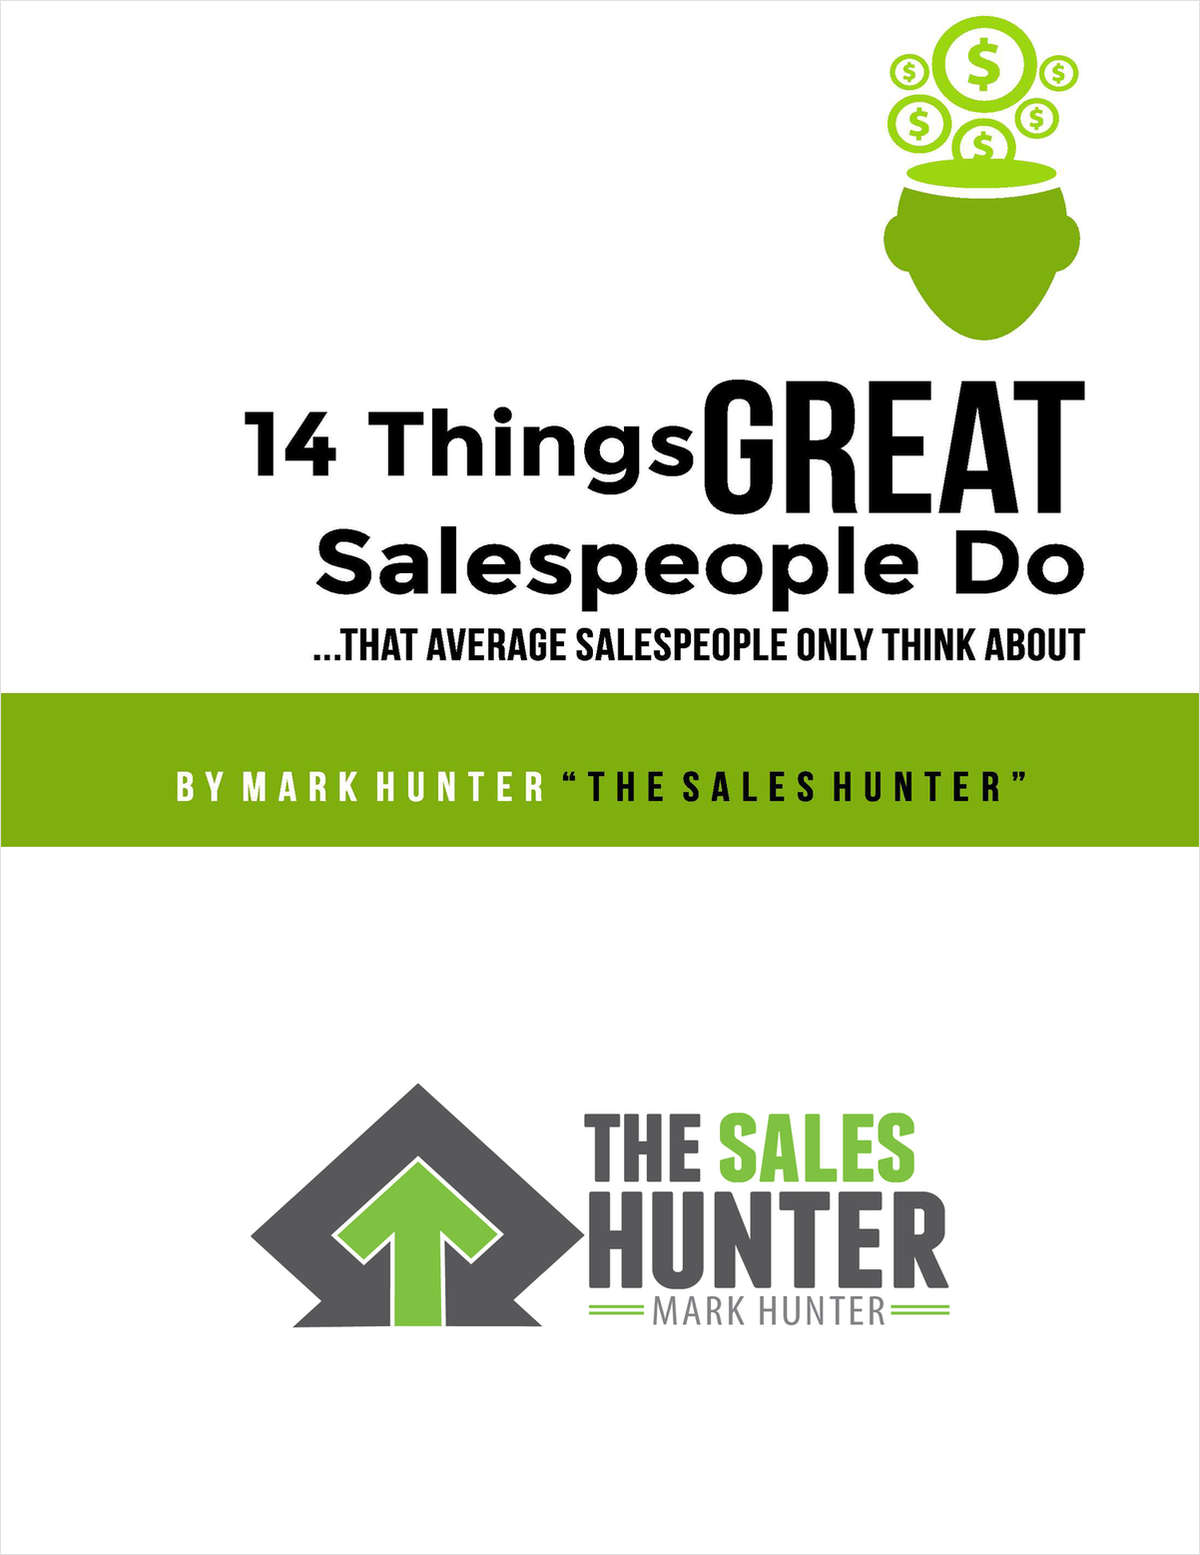 14 Things GREAT Salespeople Do, That Average Salespeople Only Think About